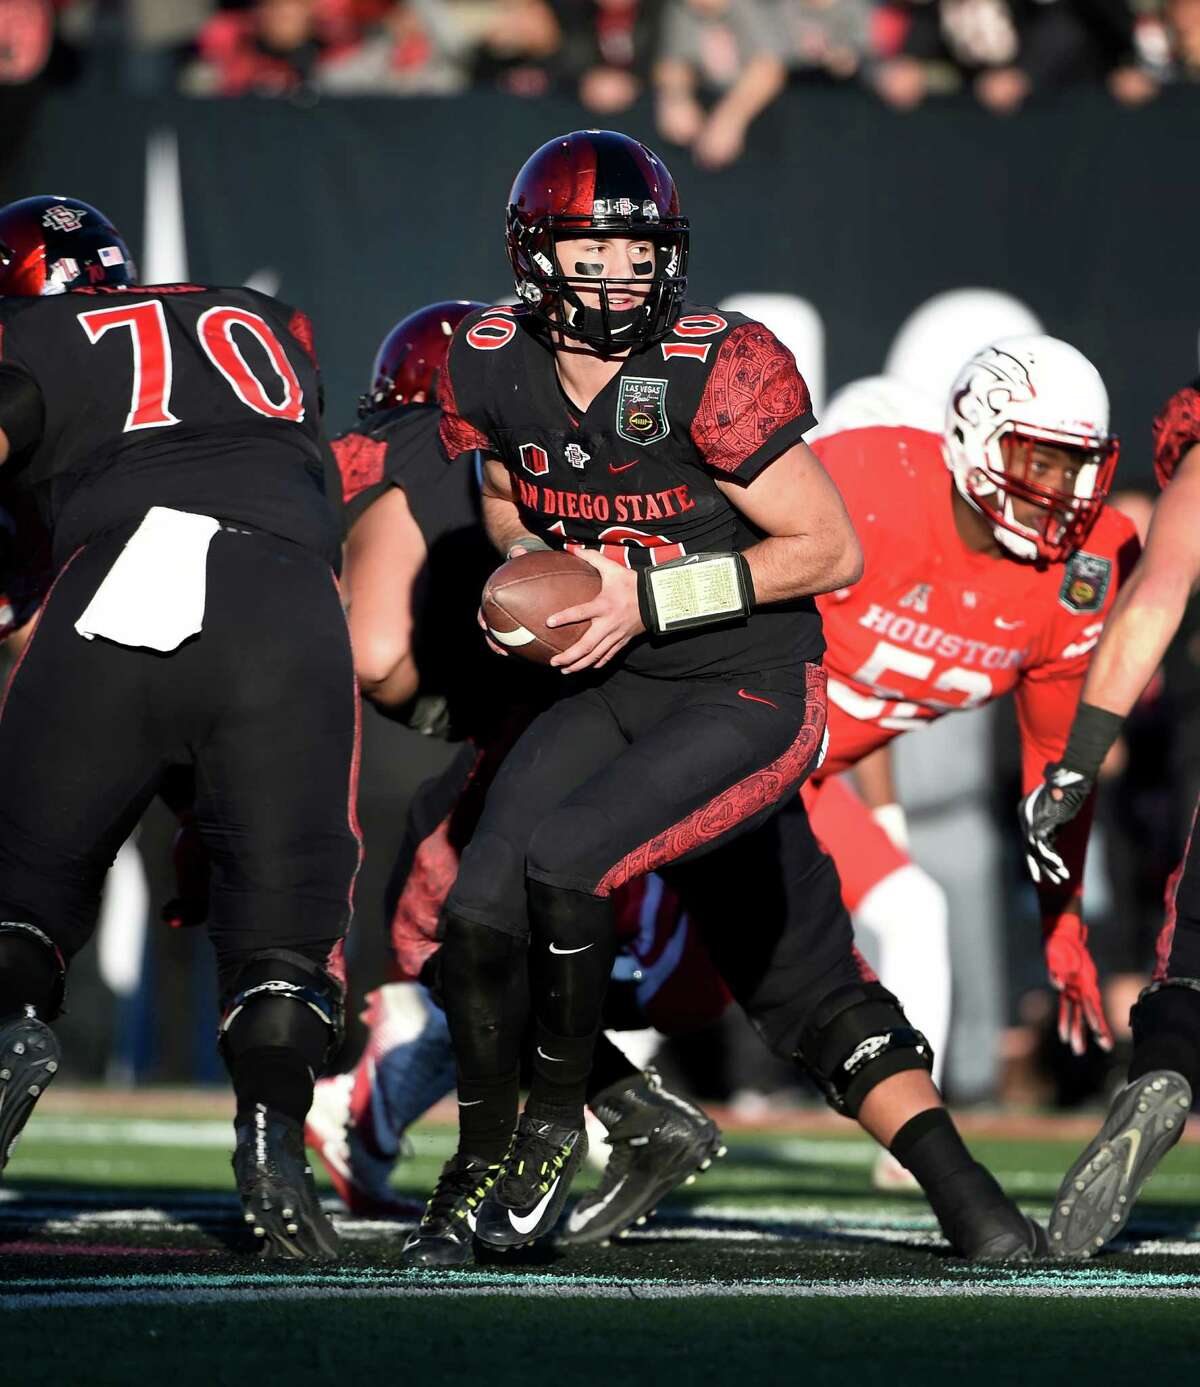 San Diego State quarterback Christian Chapman (10) looks to hand off the ball against Houston during the second half of the Las Vegas Bowl NCAA college football game on Saturday, Dec. 17, 2016, in Las Vegas. San Diego State won 34-10. (AP Photo/David Becker)